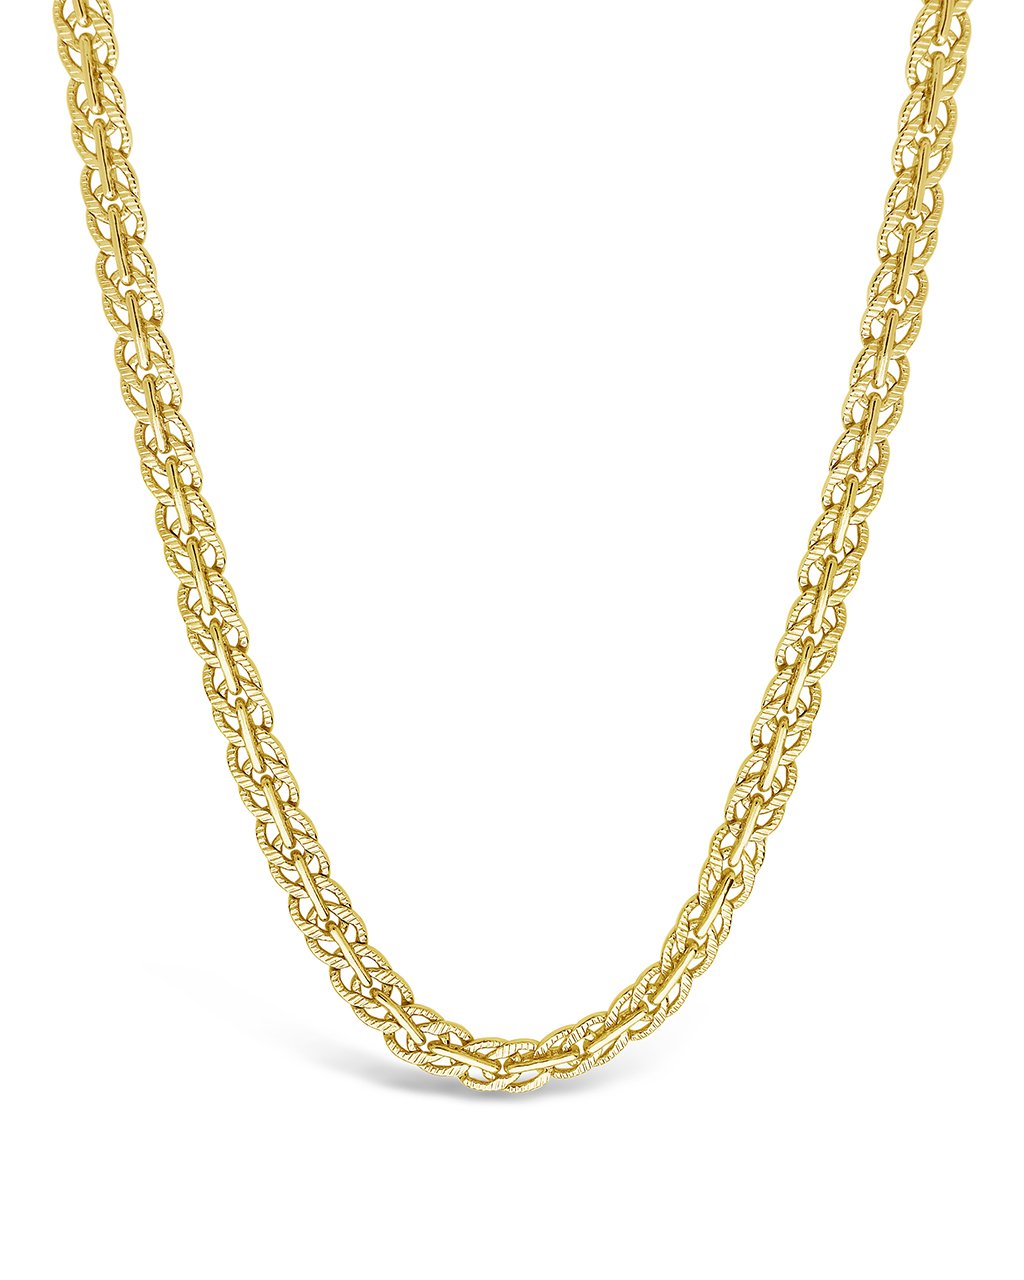 Hammered Interlocking Curb Chain Necklace Sterling Forever Gold 